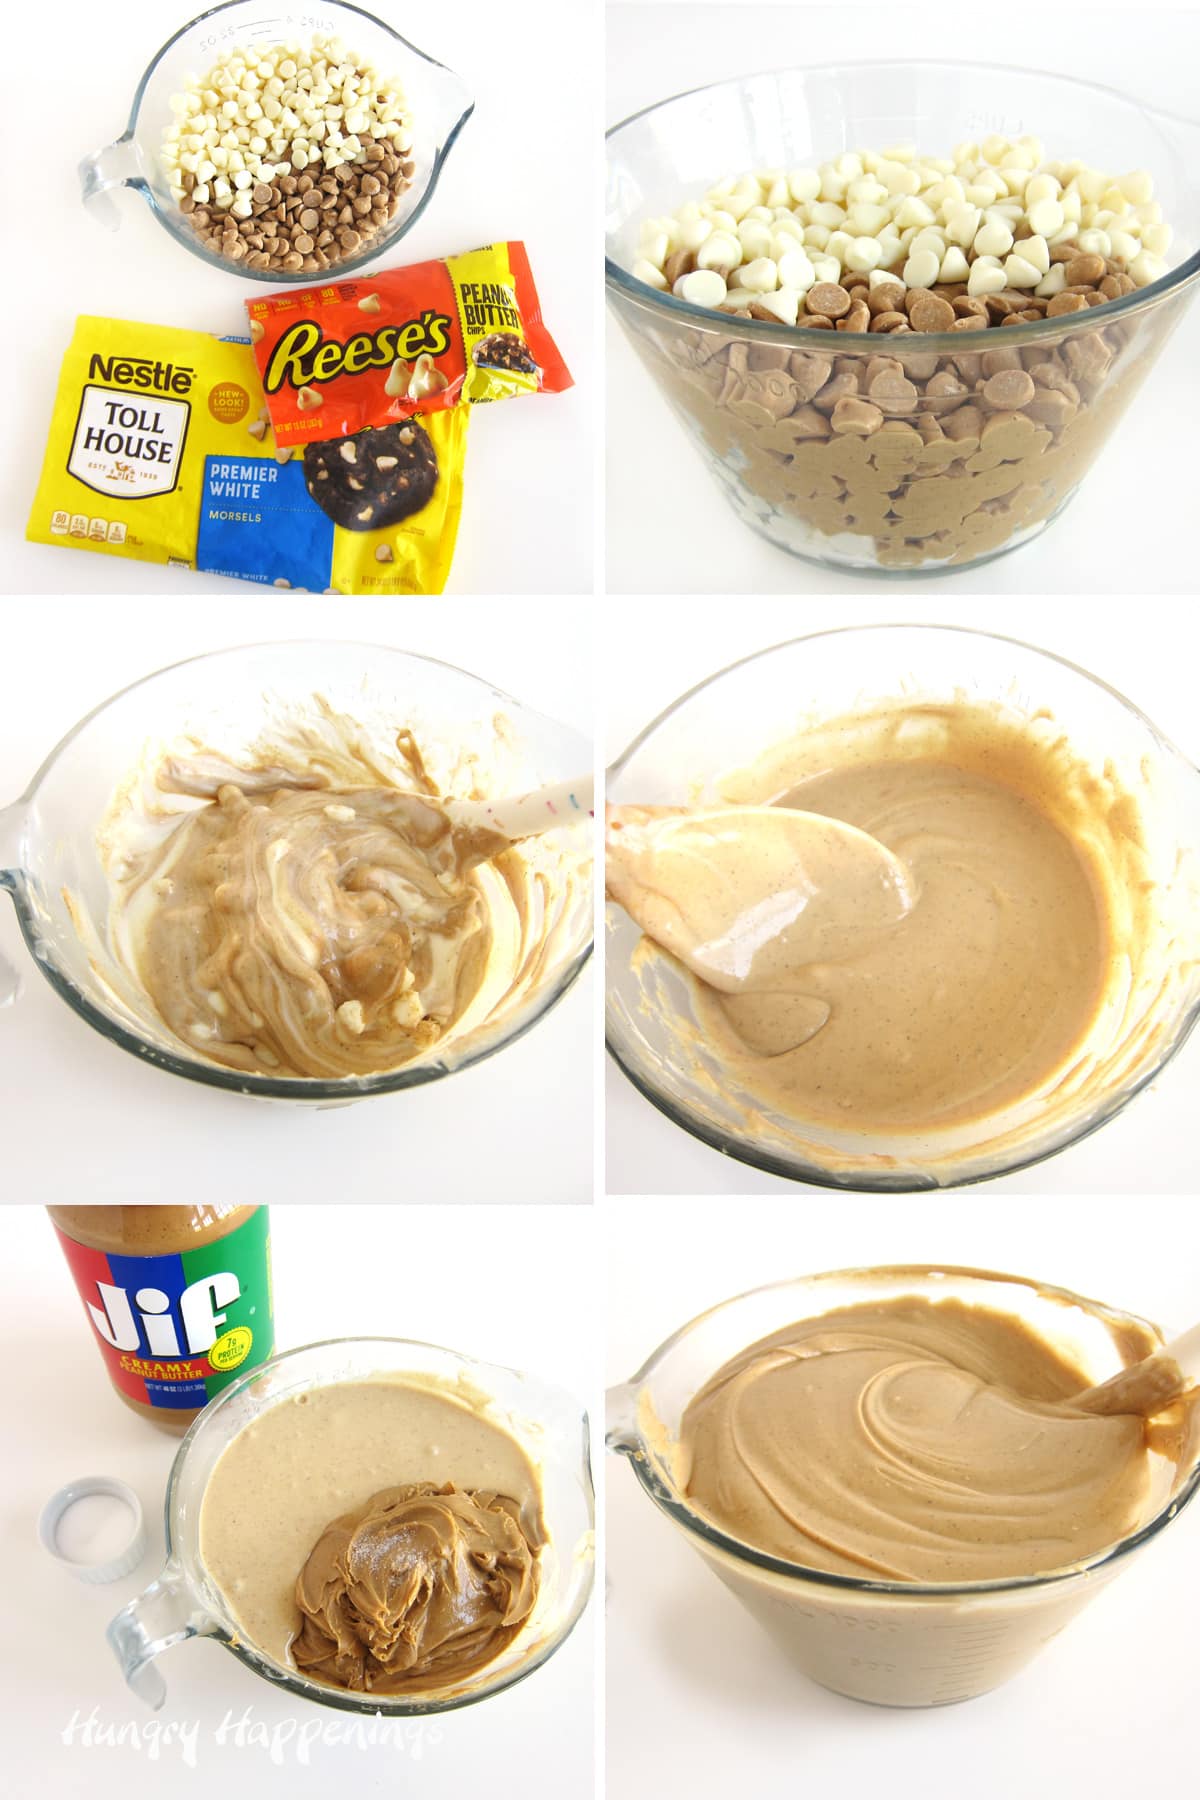 Melt white chocolate chips and peanut butter chips then mix in salt and peanut butter to make easy peanut butter fudge.